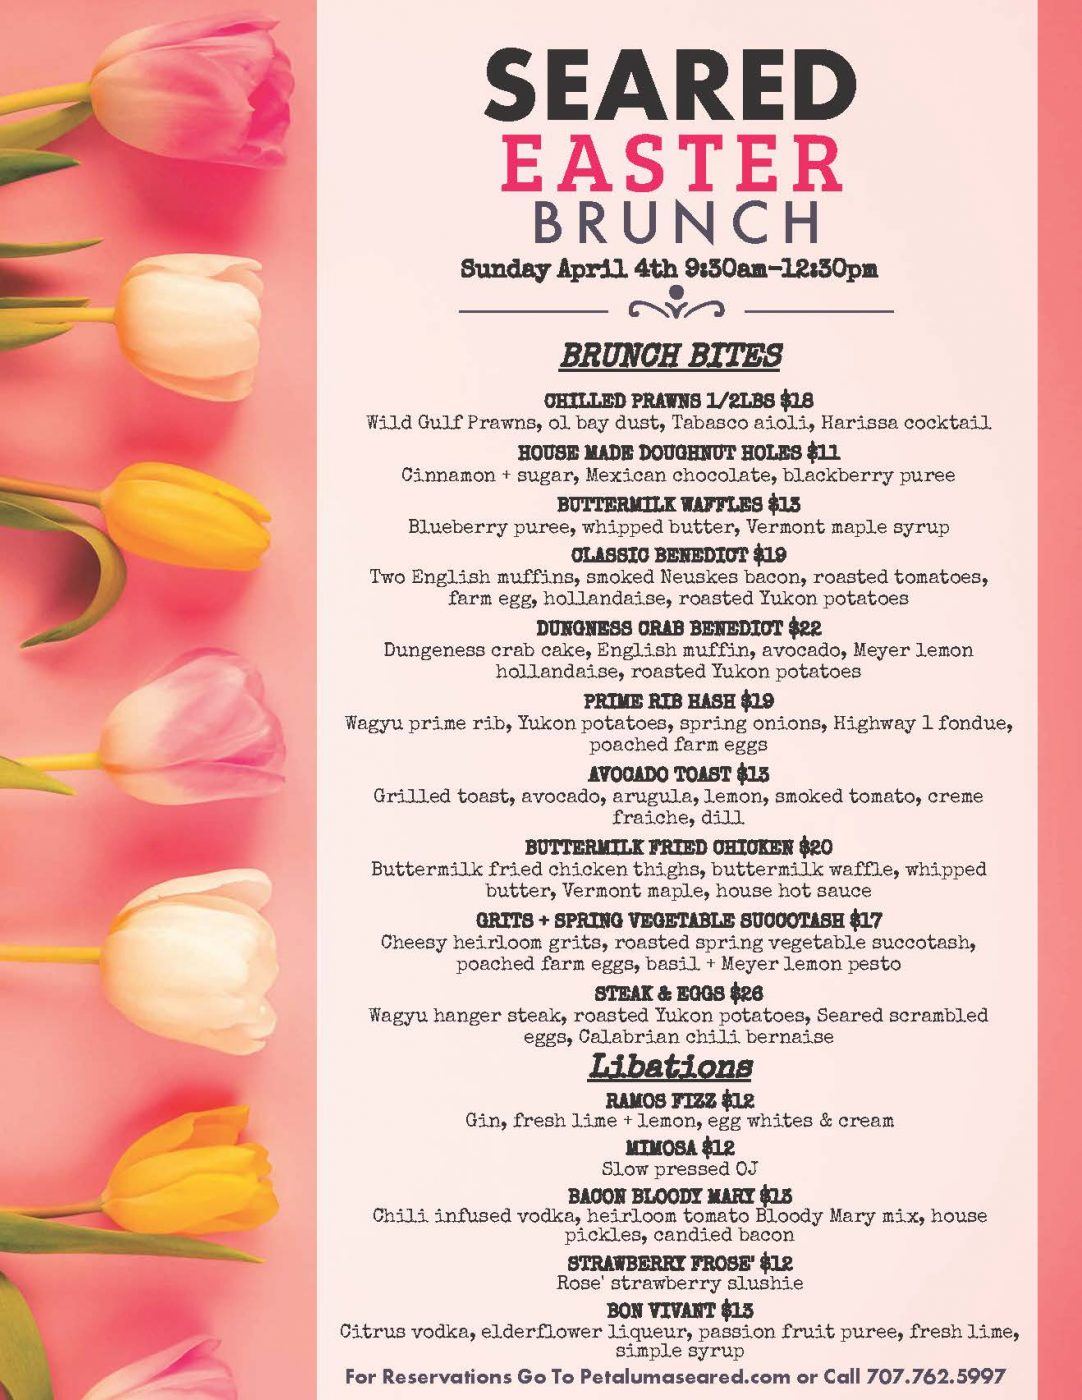 Limited Special Easter Sunday Brunch menu available at Seared in Petaluma